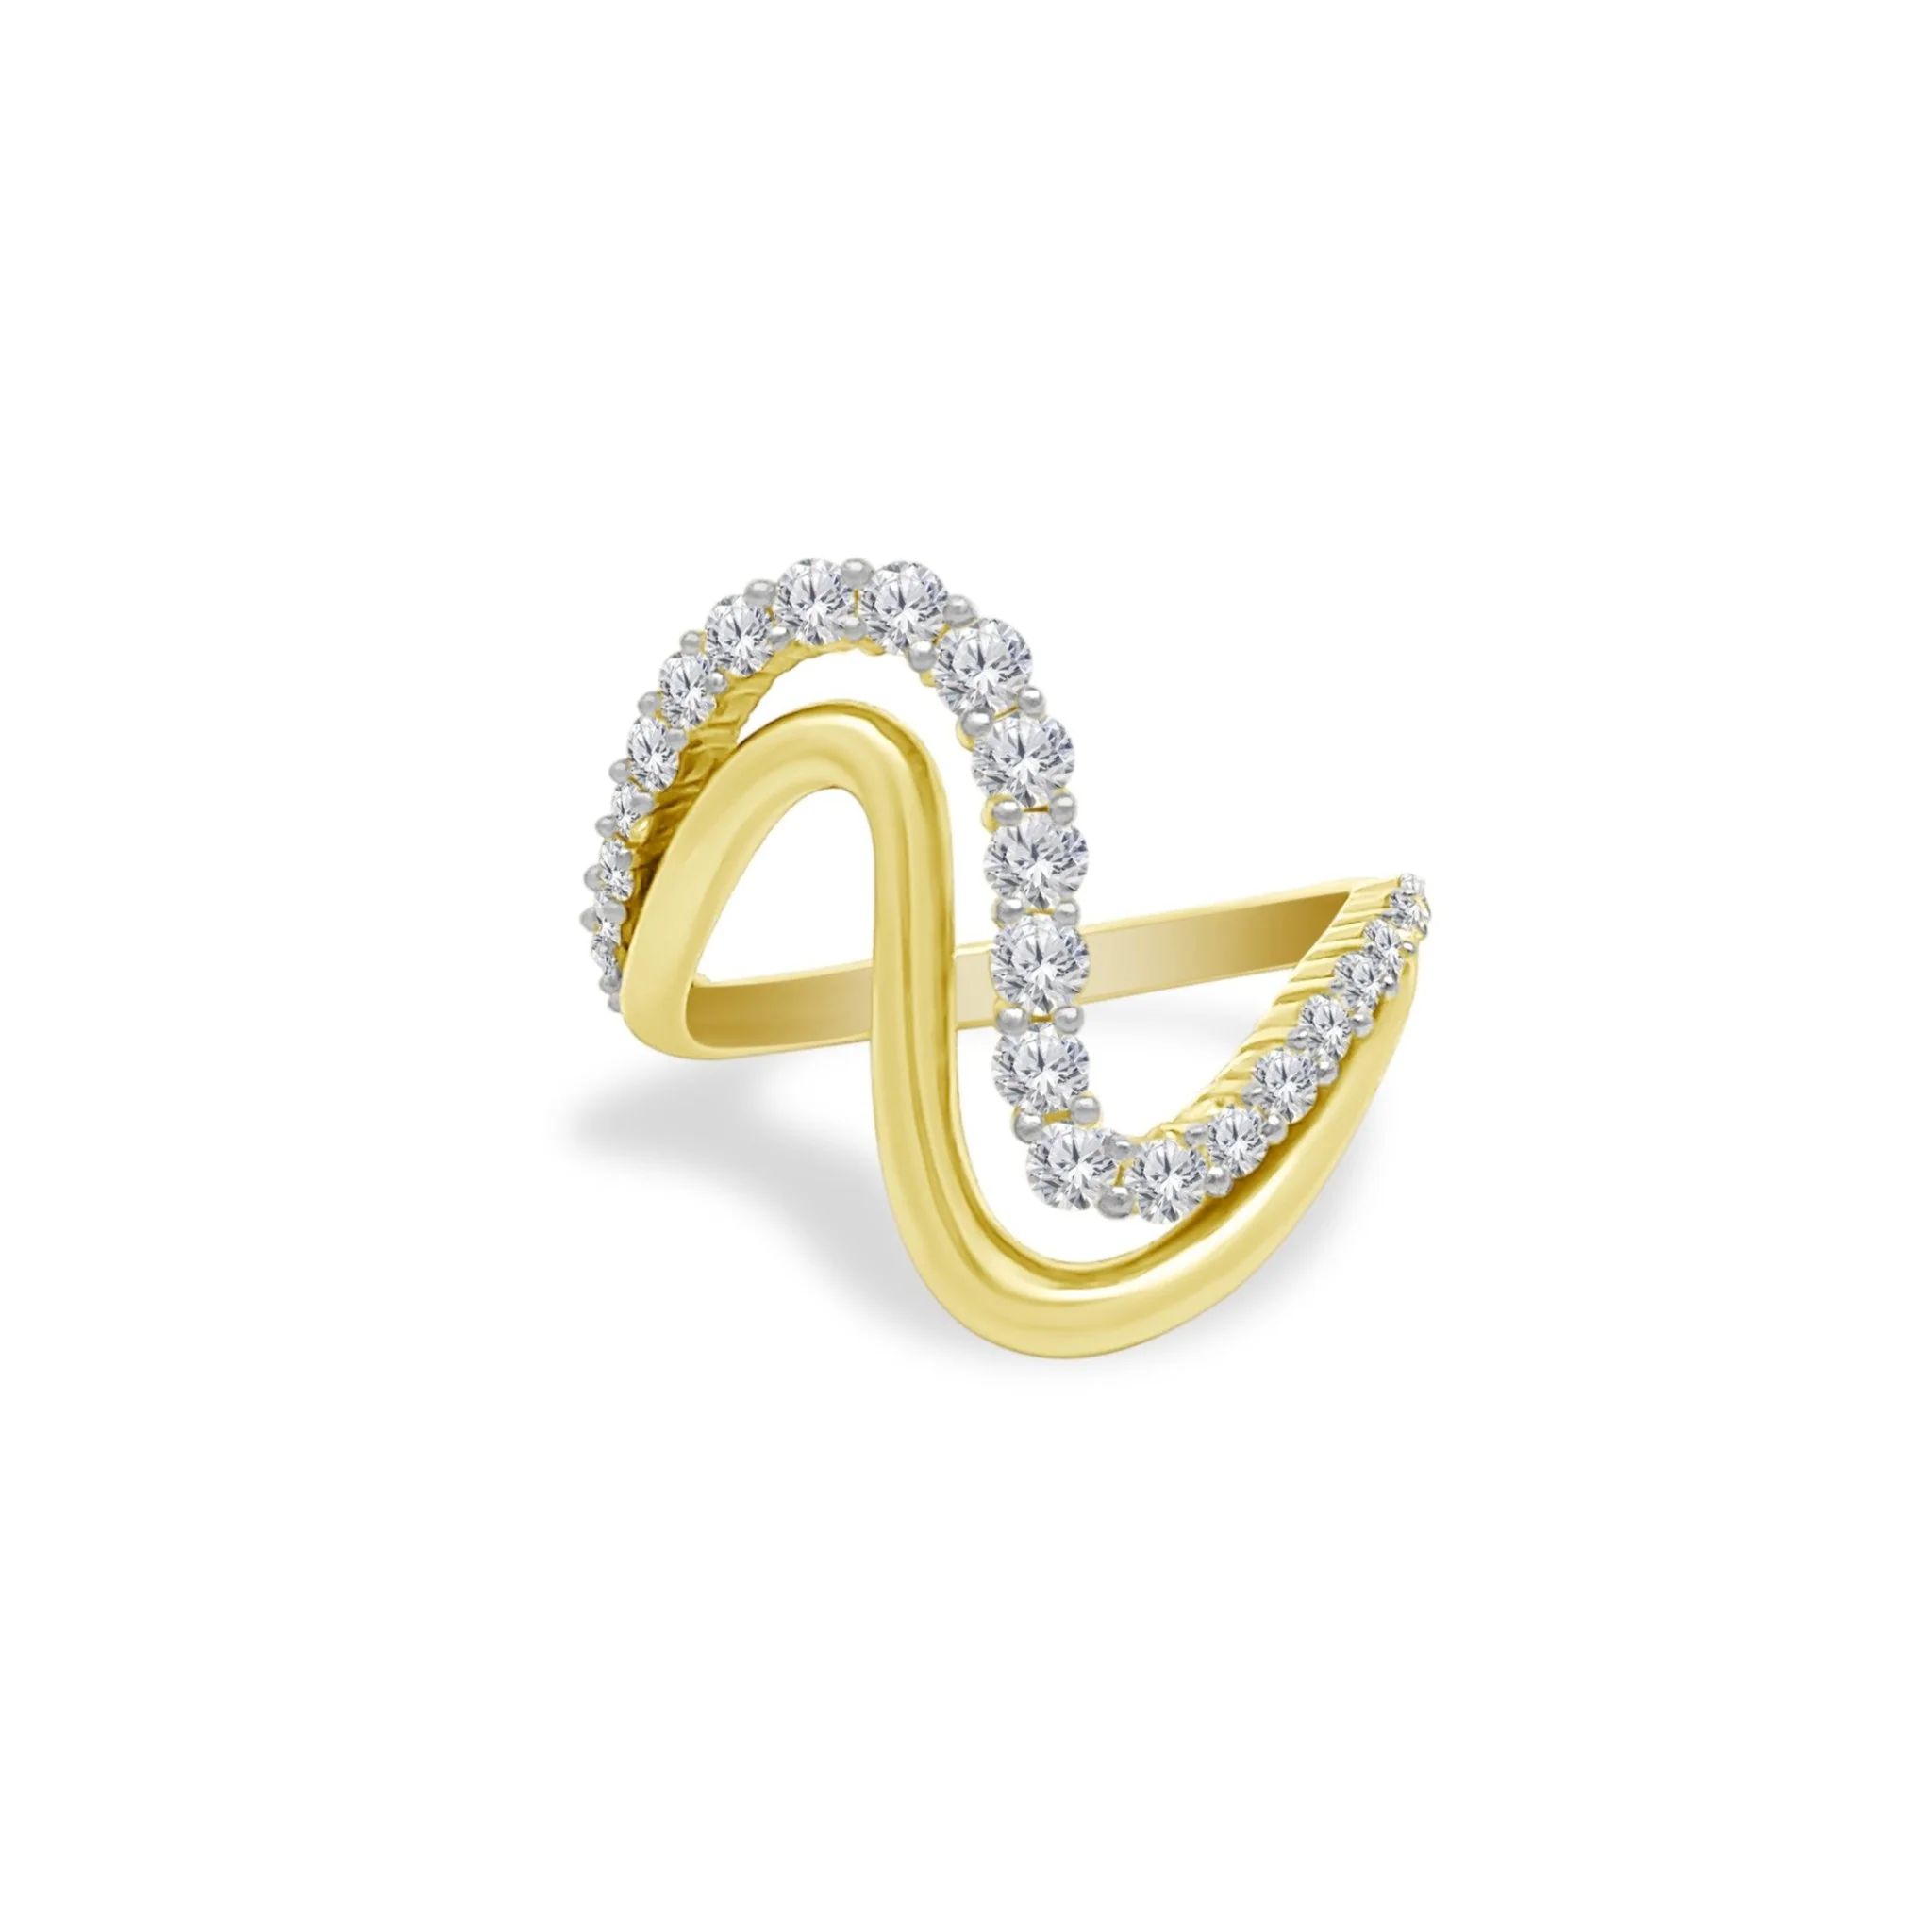 Gold & Diamond Wavy Ring | LINDSEY LEIGH JEWELRY